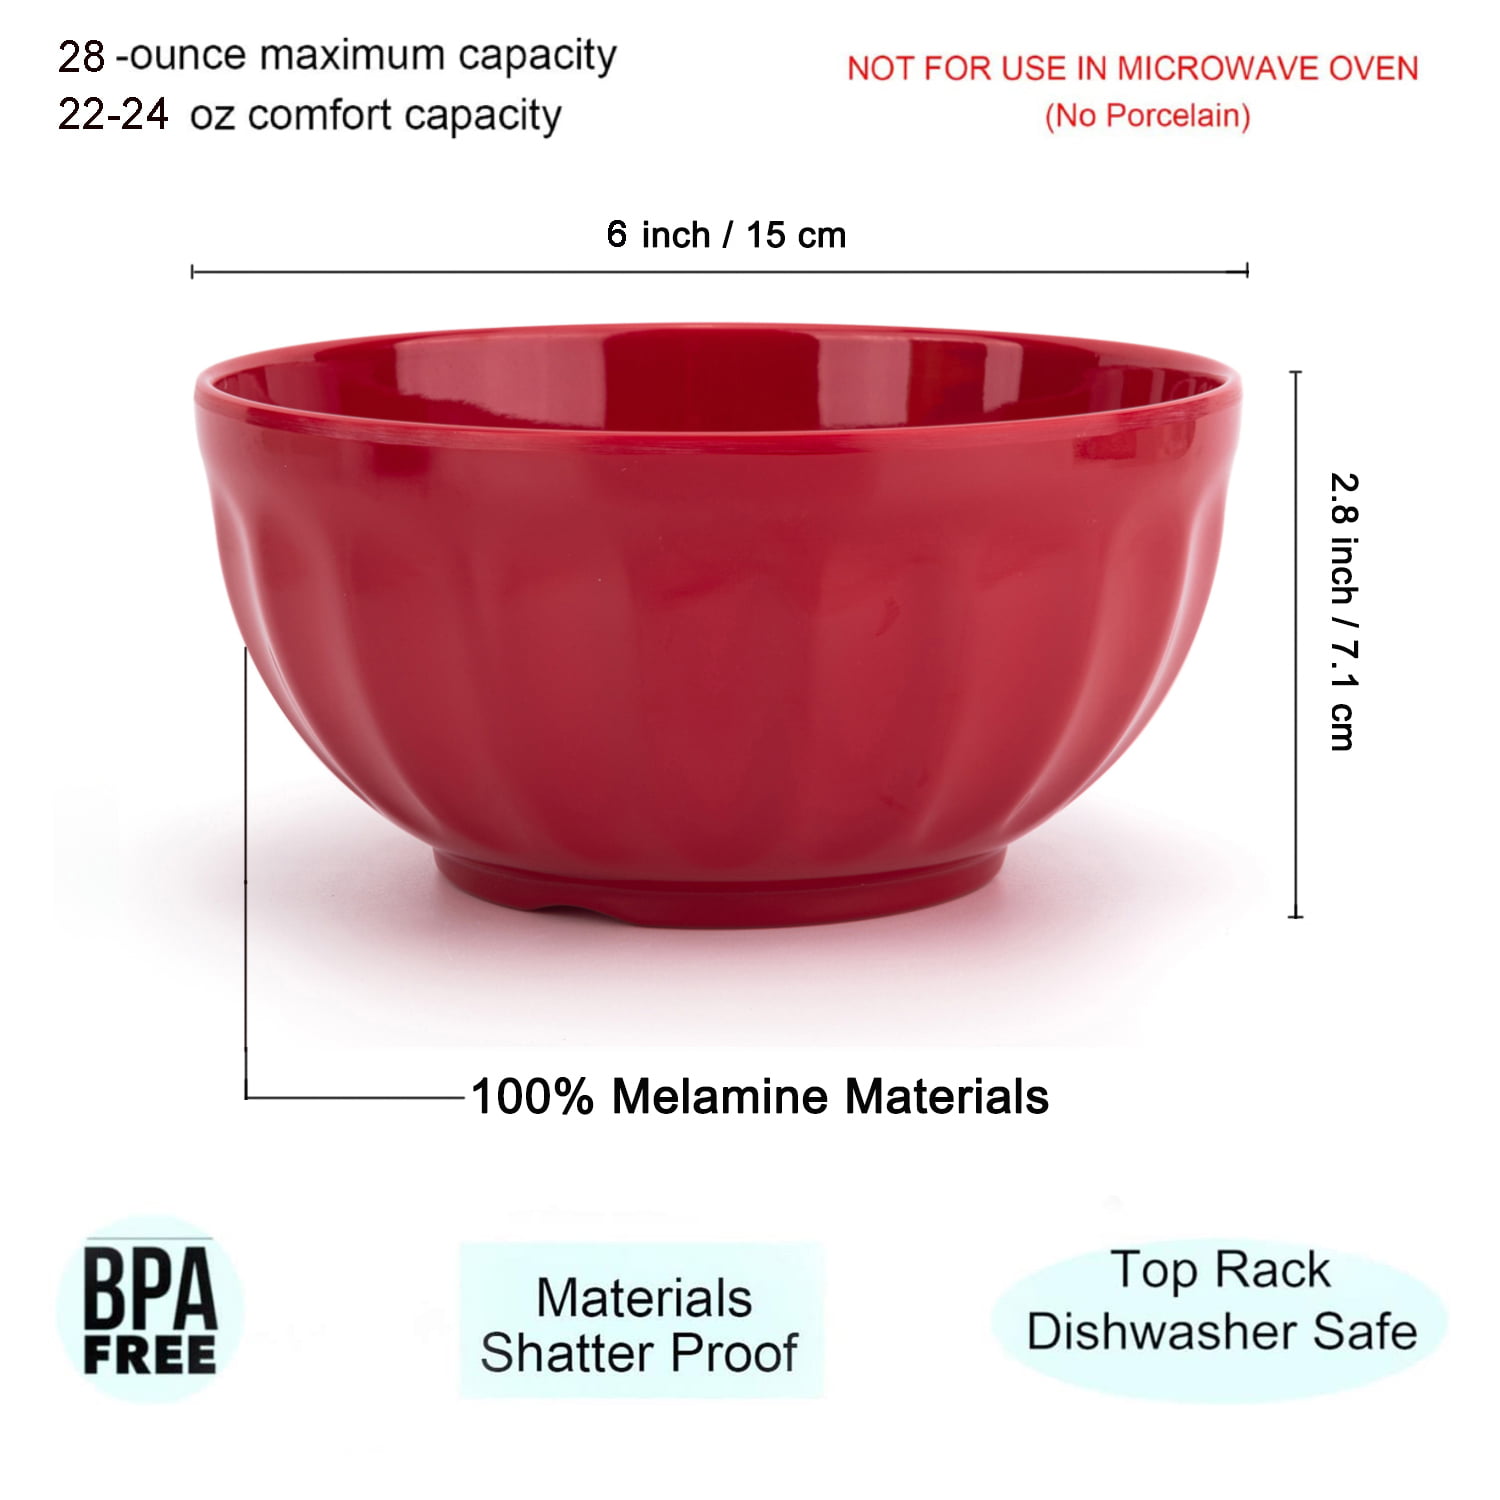 KX-WARE Plastic Bowls set of 12 - Unbreakable and Reusable 6-inch Plastic  Cereal/Soup/Salad Bowls Multicolor | Microwave/Dishwasher Safe, BPA Free